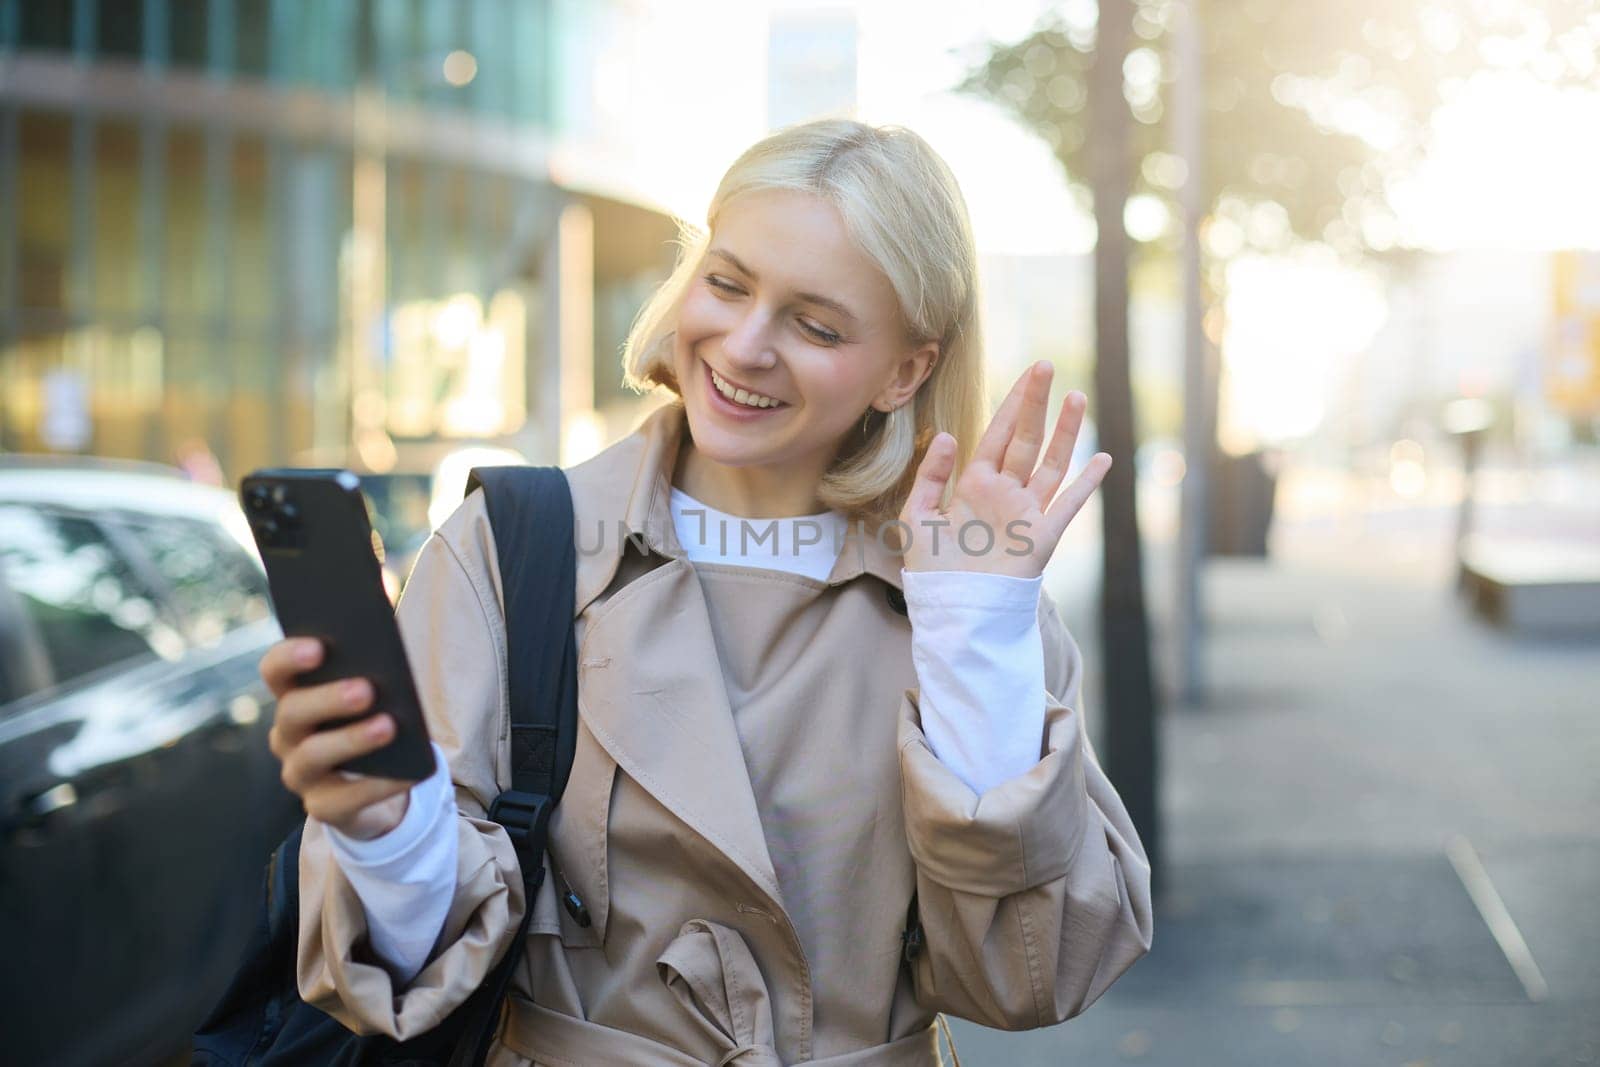 Smiling young modern woman, walking on street, video chats with friend, says hello, waves hand at mobile phone camera, talking to someone on smartphone application.